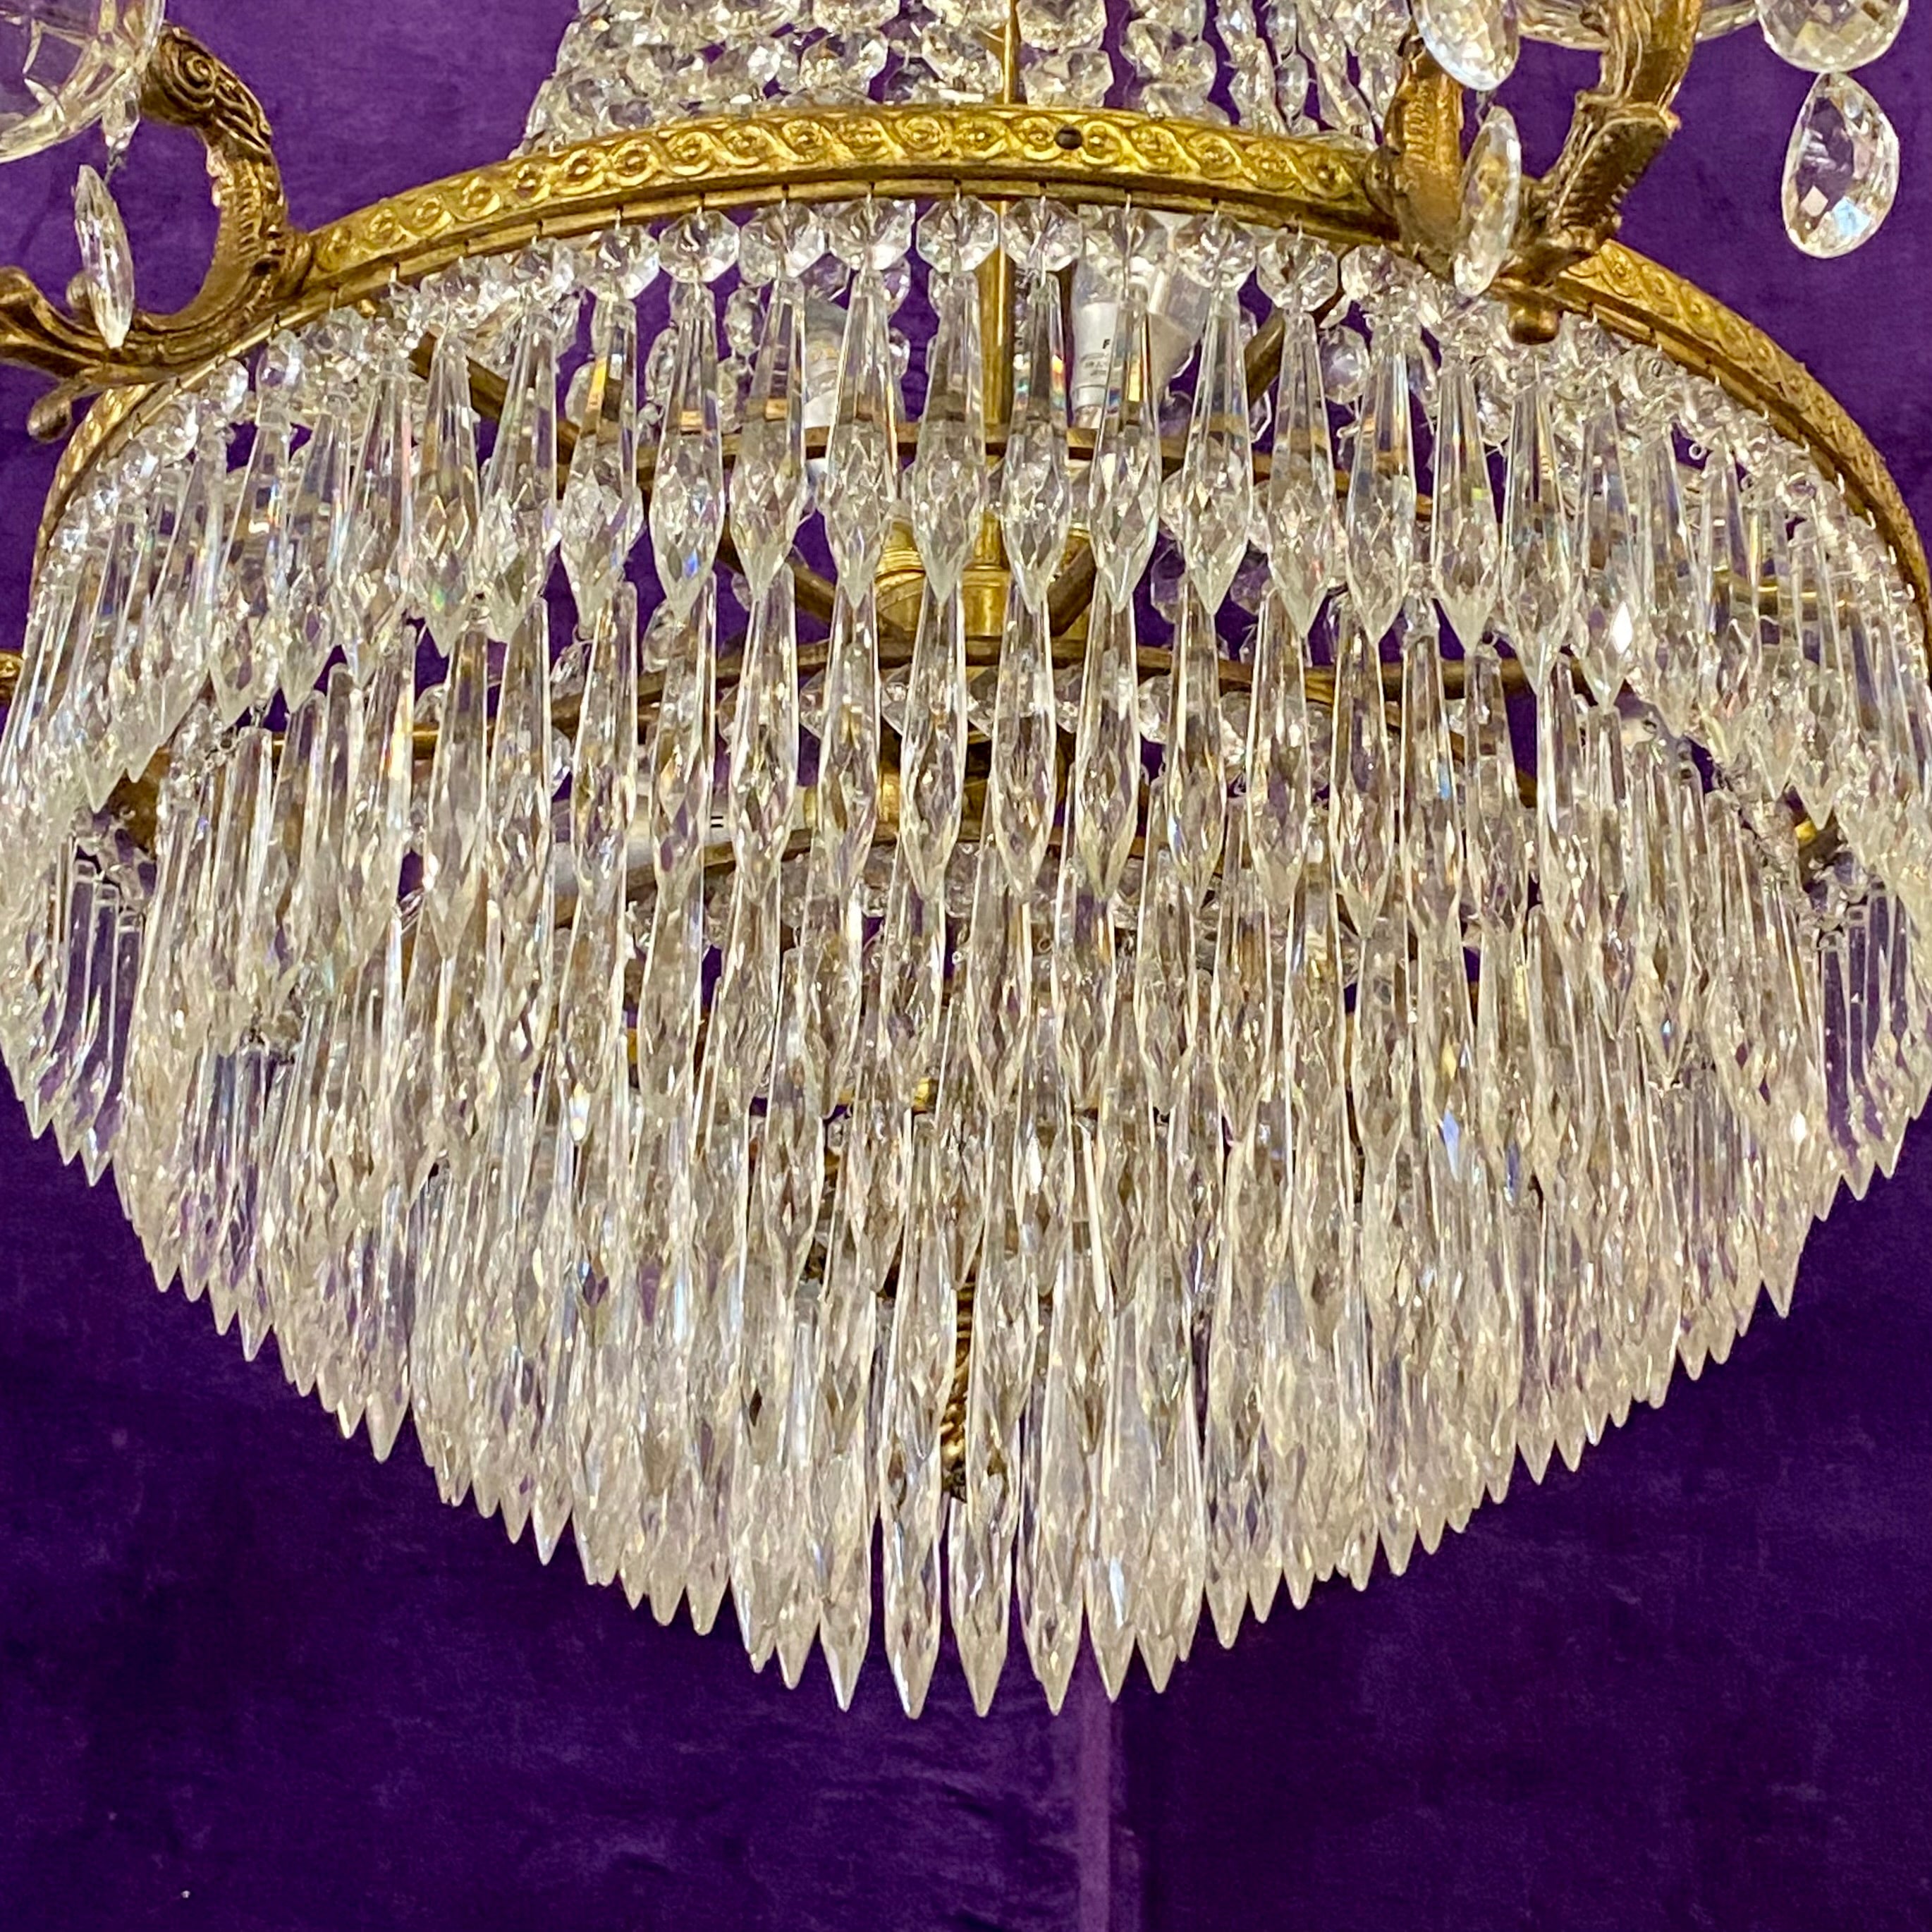 Antique Gilt Metal and Crystal Neoclassical Chandelier